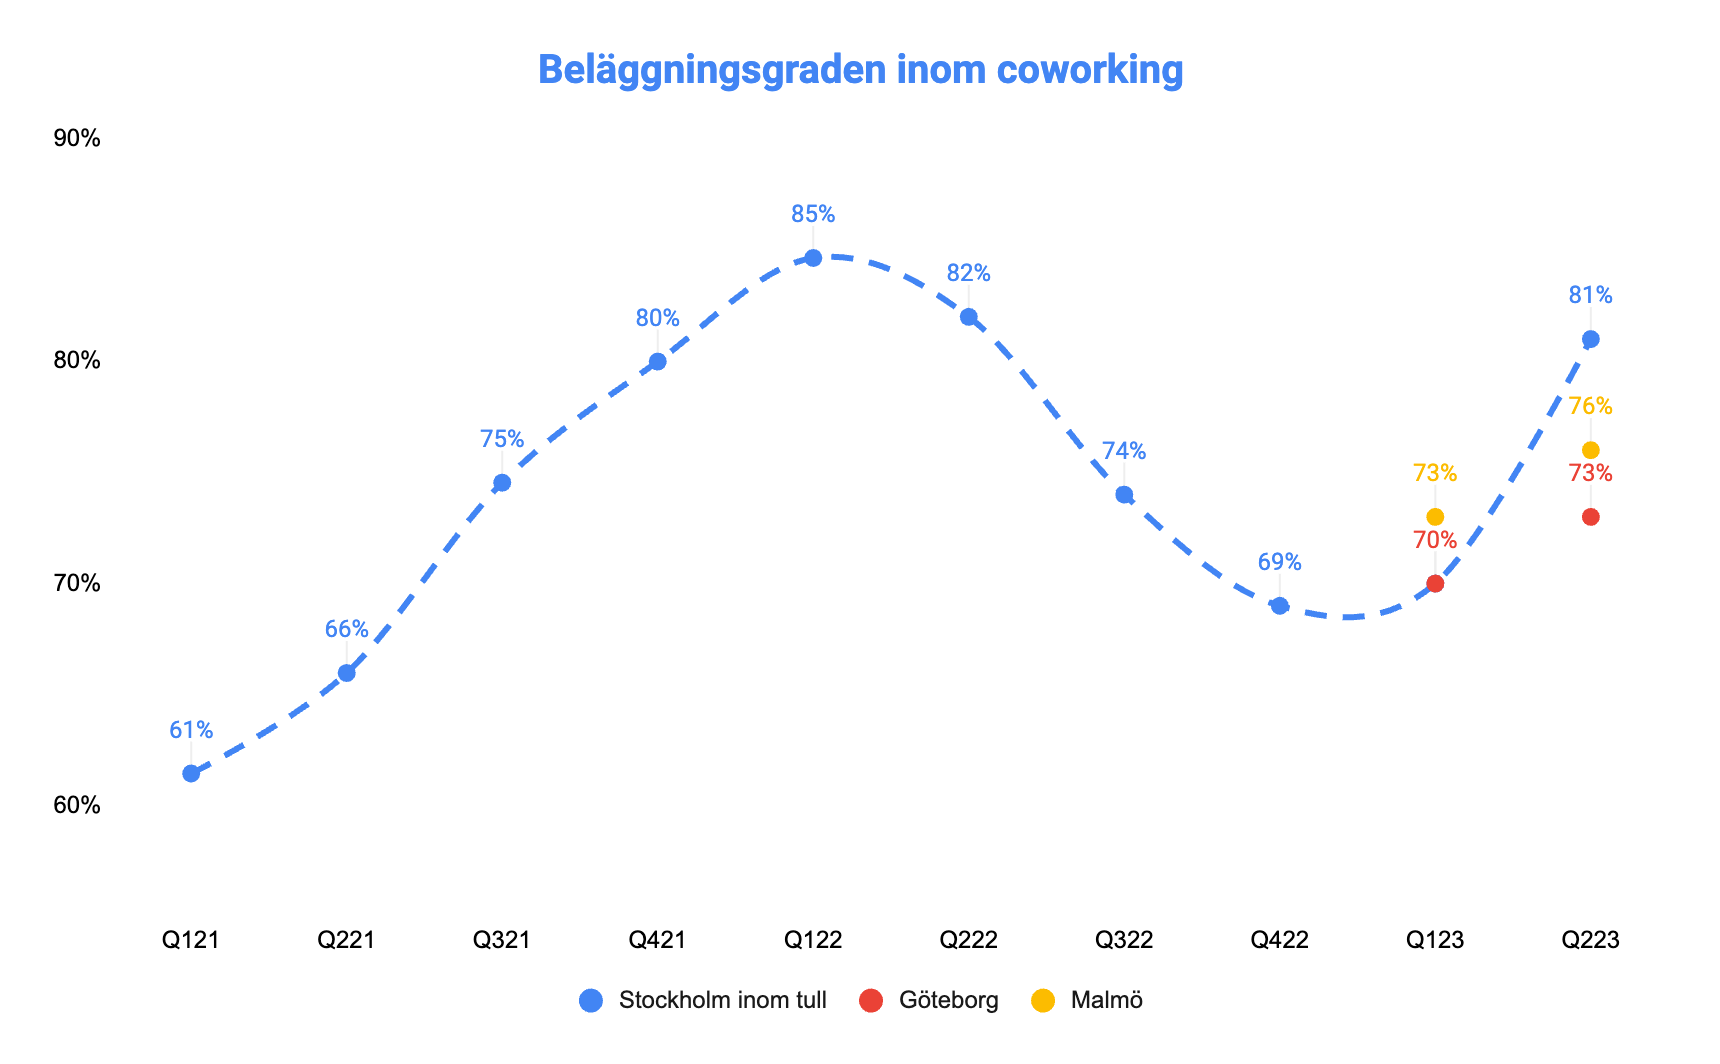 Coworking's Strong Comeback in 2022 and Predictions for 2023